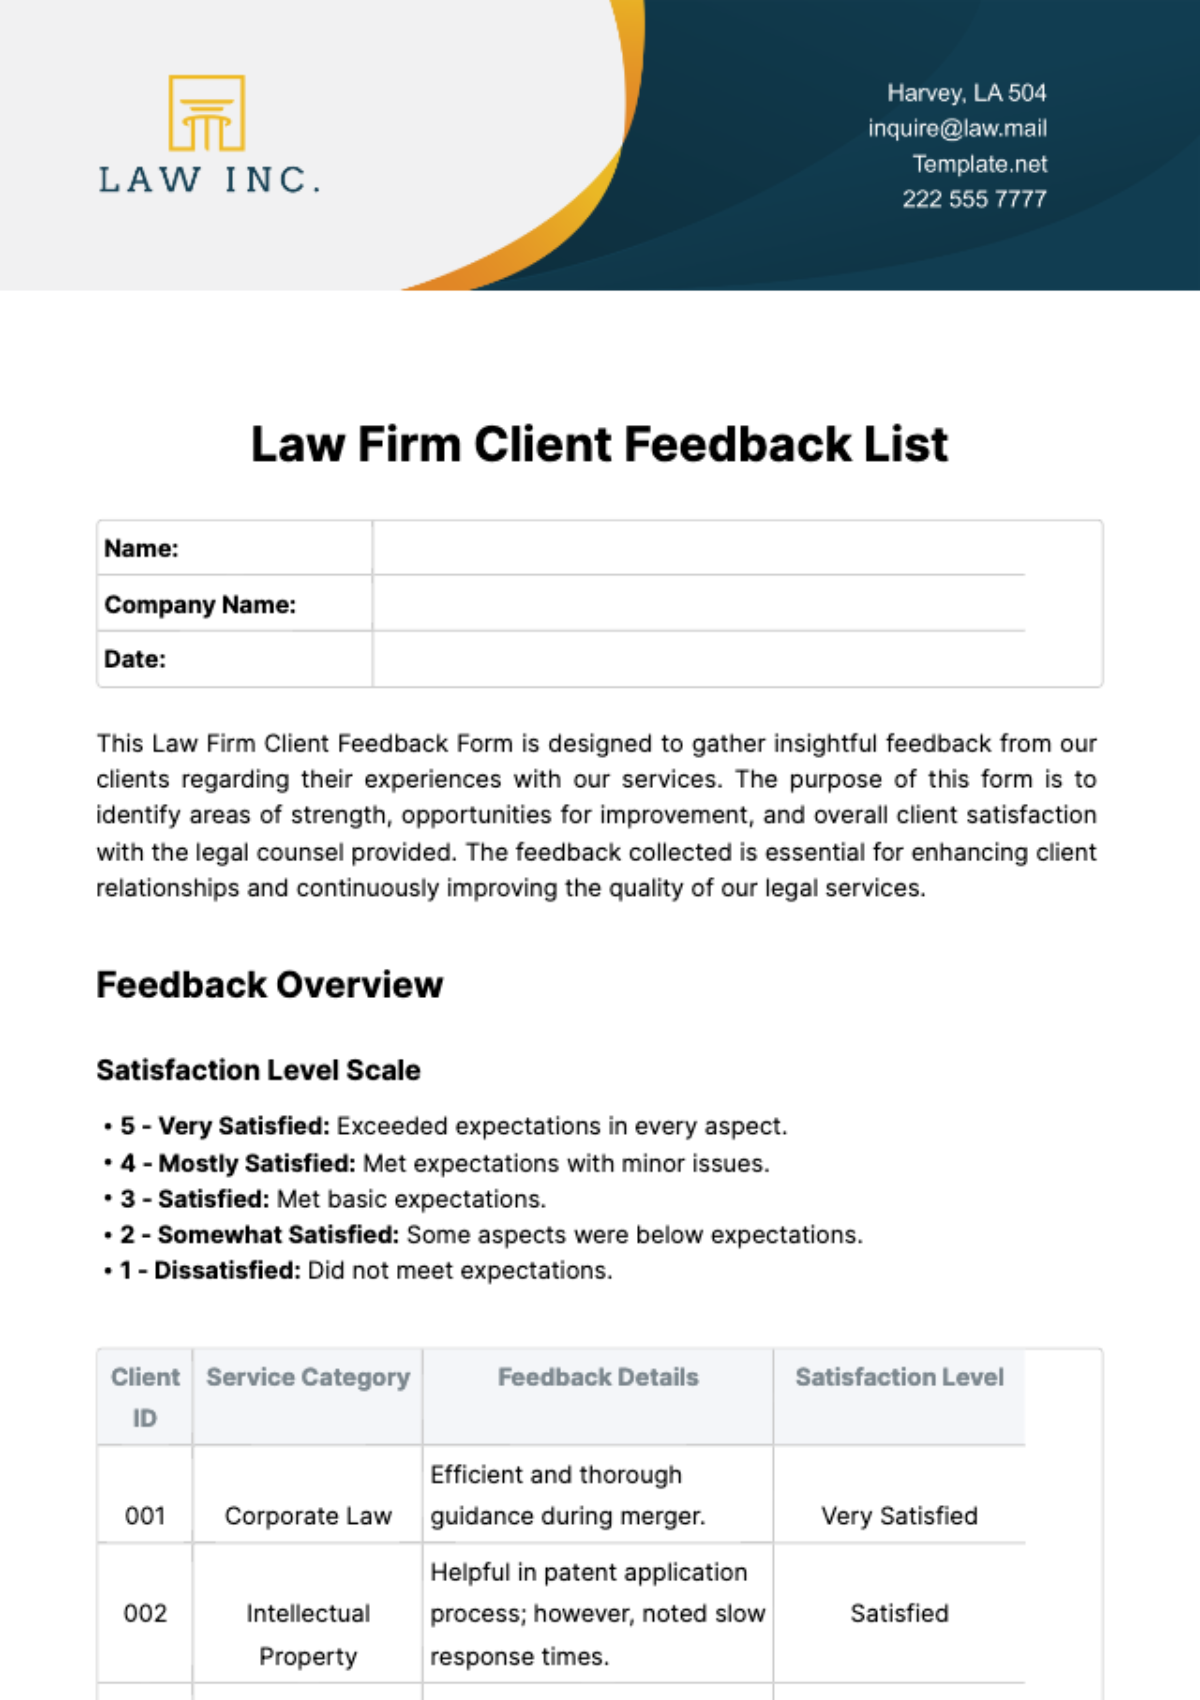 Free Law Firm Client Feedback List Template